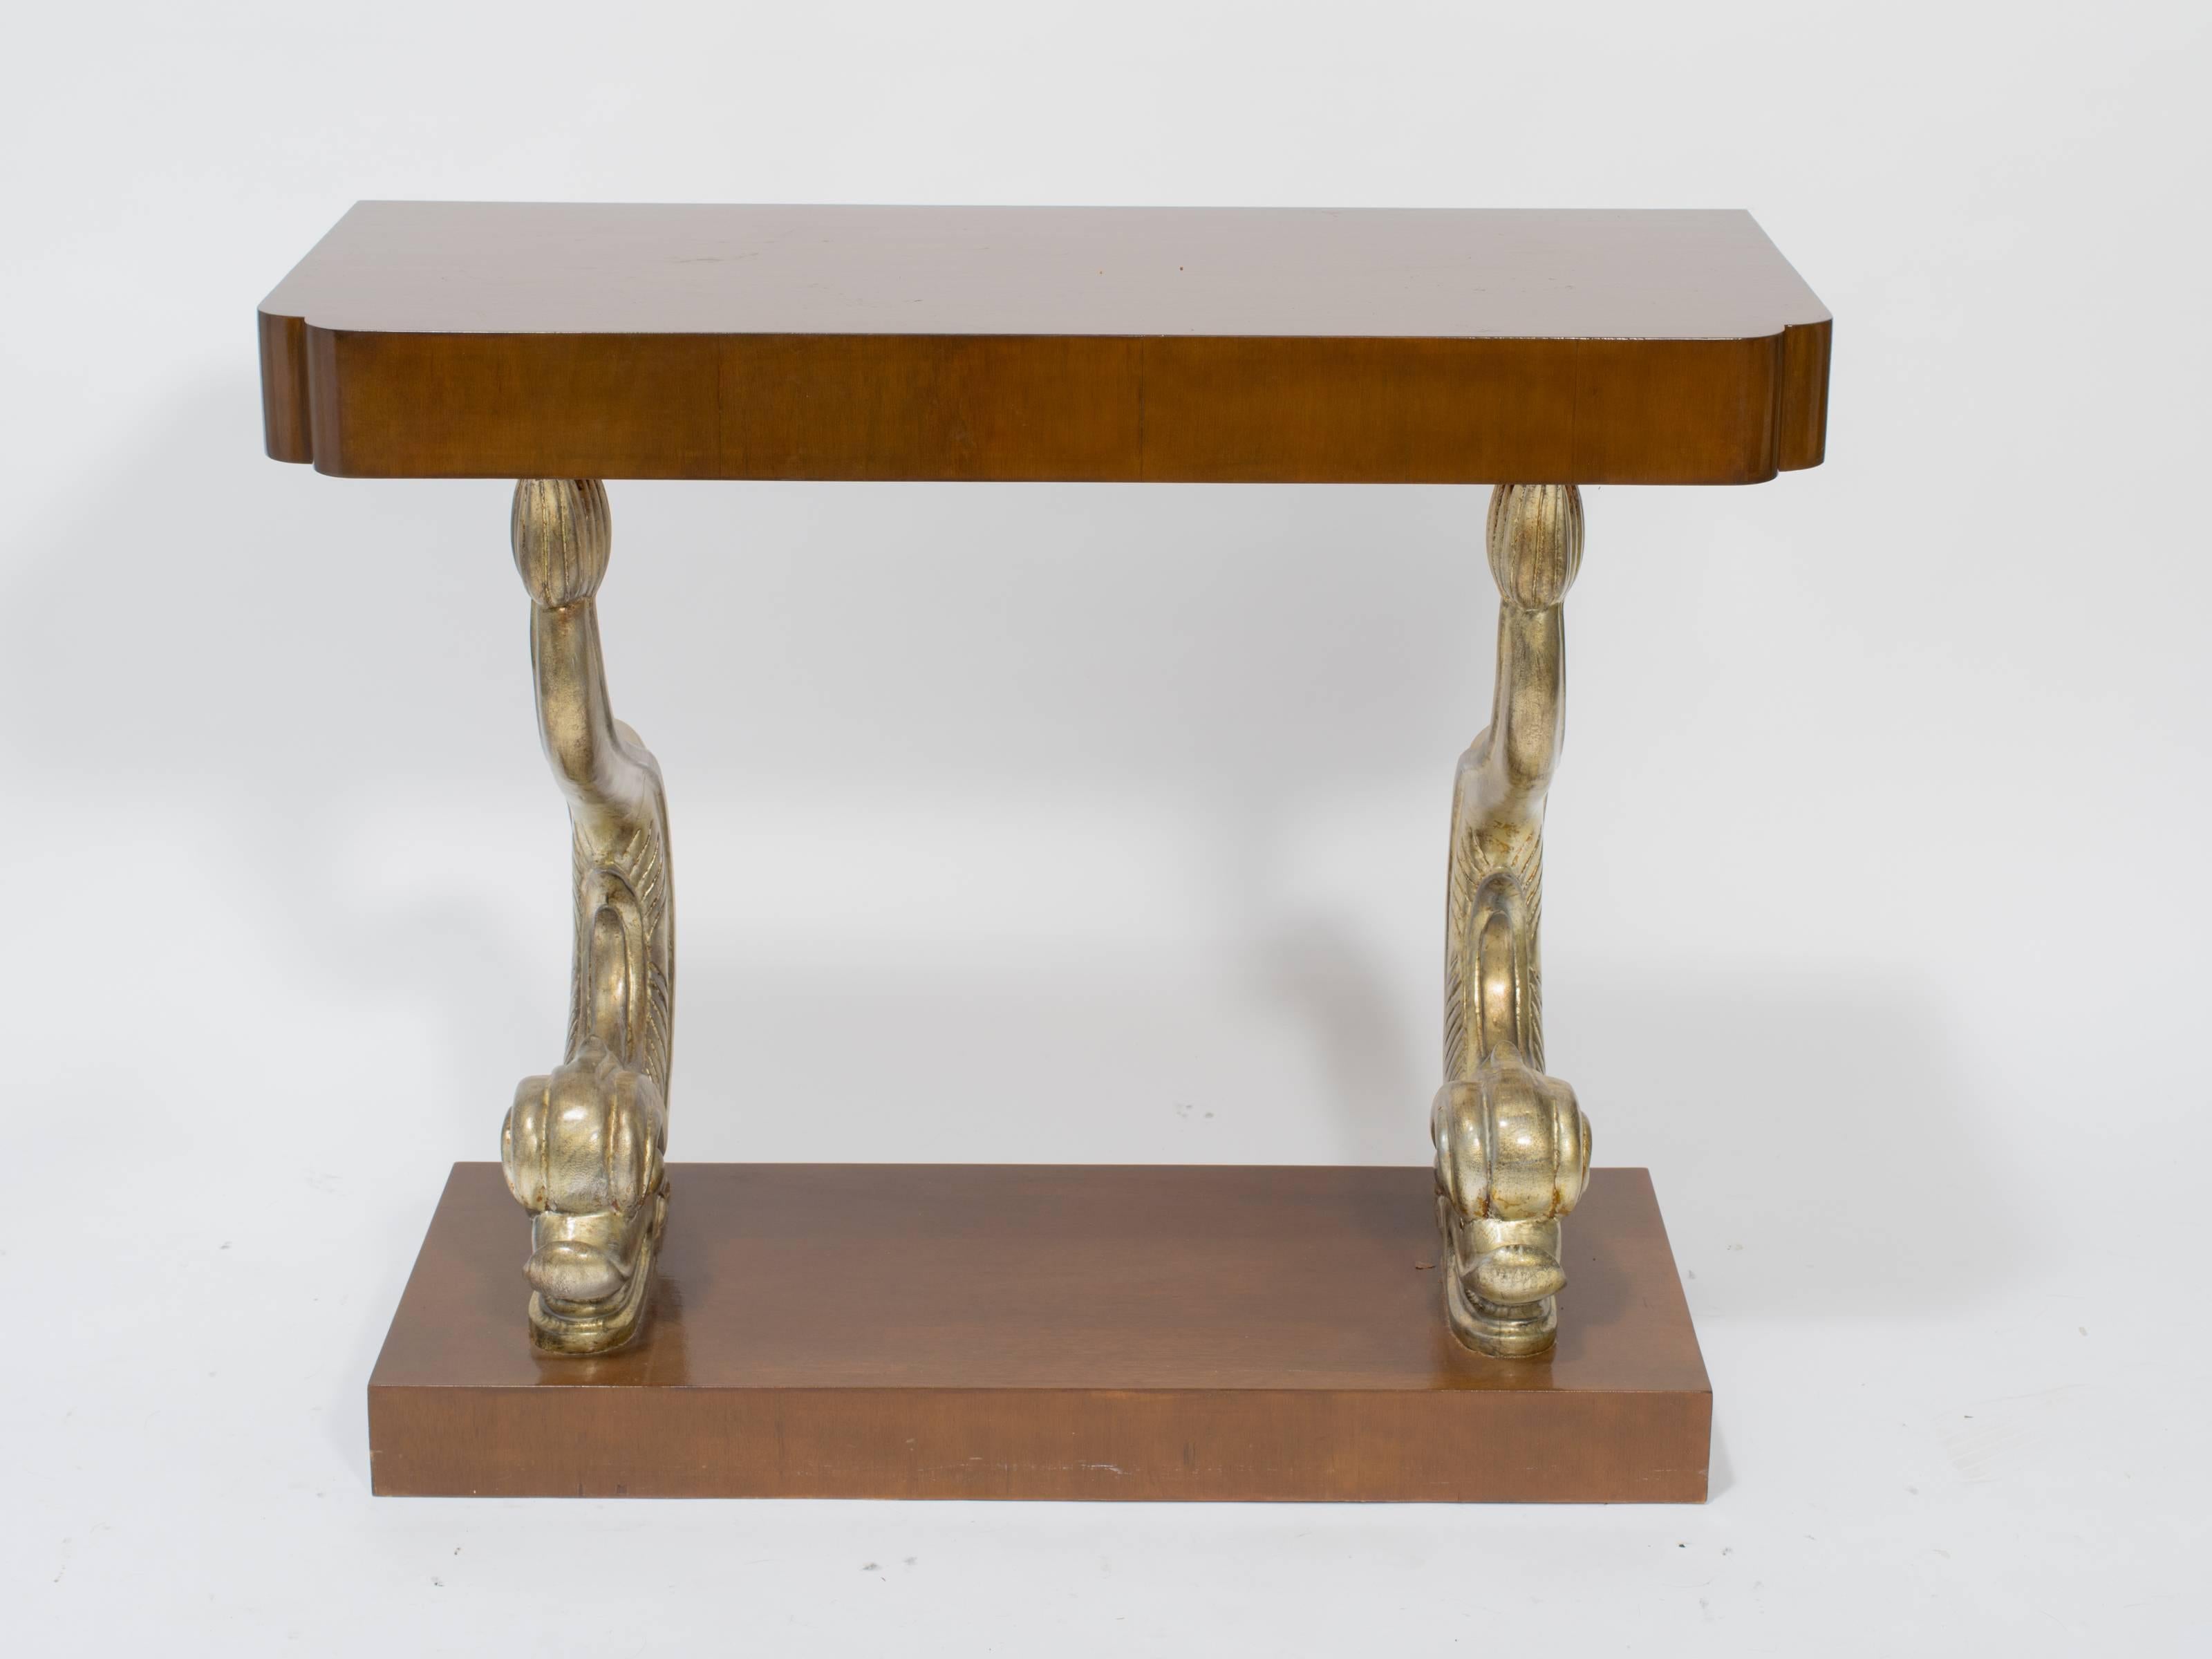 1940s Art Deco wood dolphin console table.